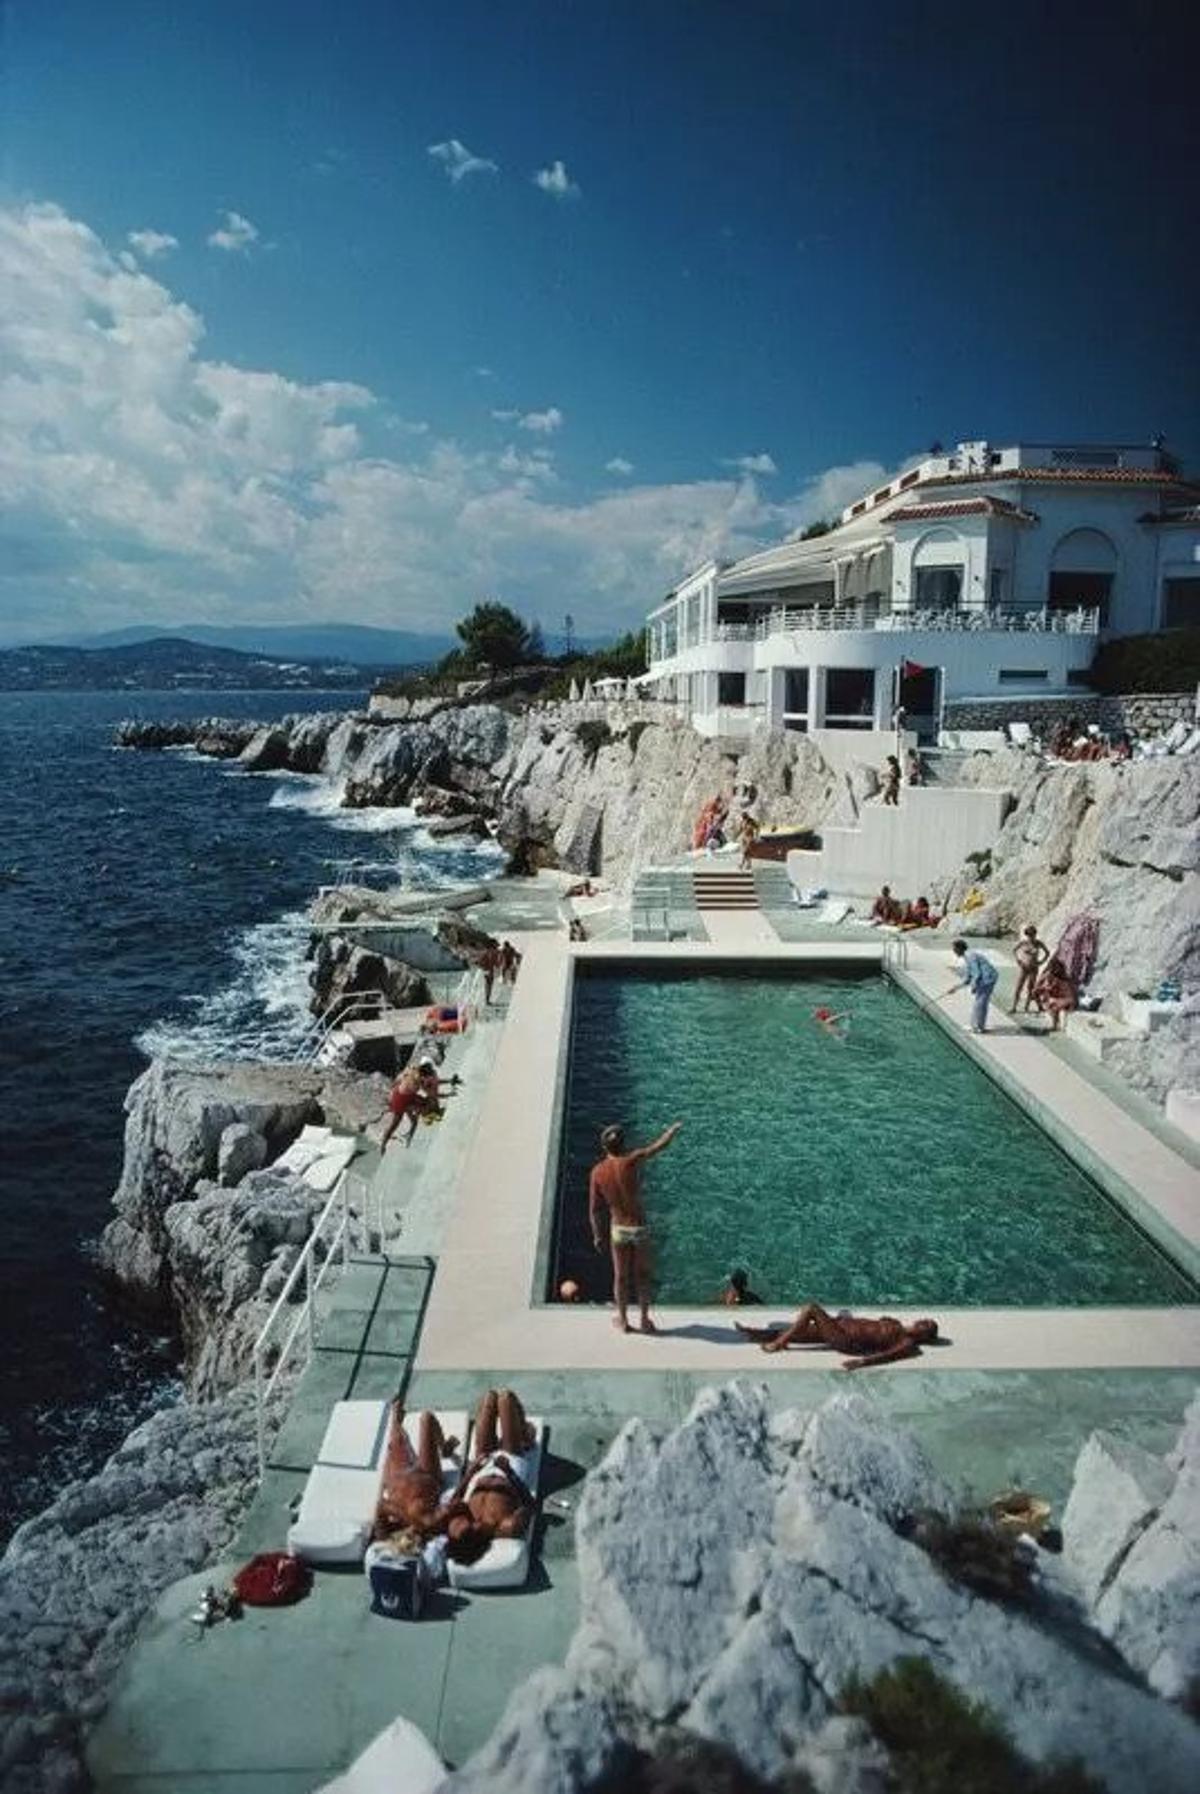 Eden-Roc Pool 
1976
by Slim Aarons

printed 2024
Slim Aarons Limited Estate Edition

Guests round the swimming pool at the Hotel du Cap Eden-Roc, Antibes, France, August 1976.
 
unframed
c type print
20×24″ inches / 51 x 61 cm paper size


Limited